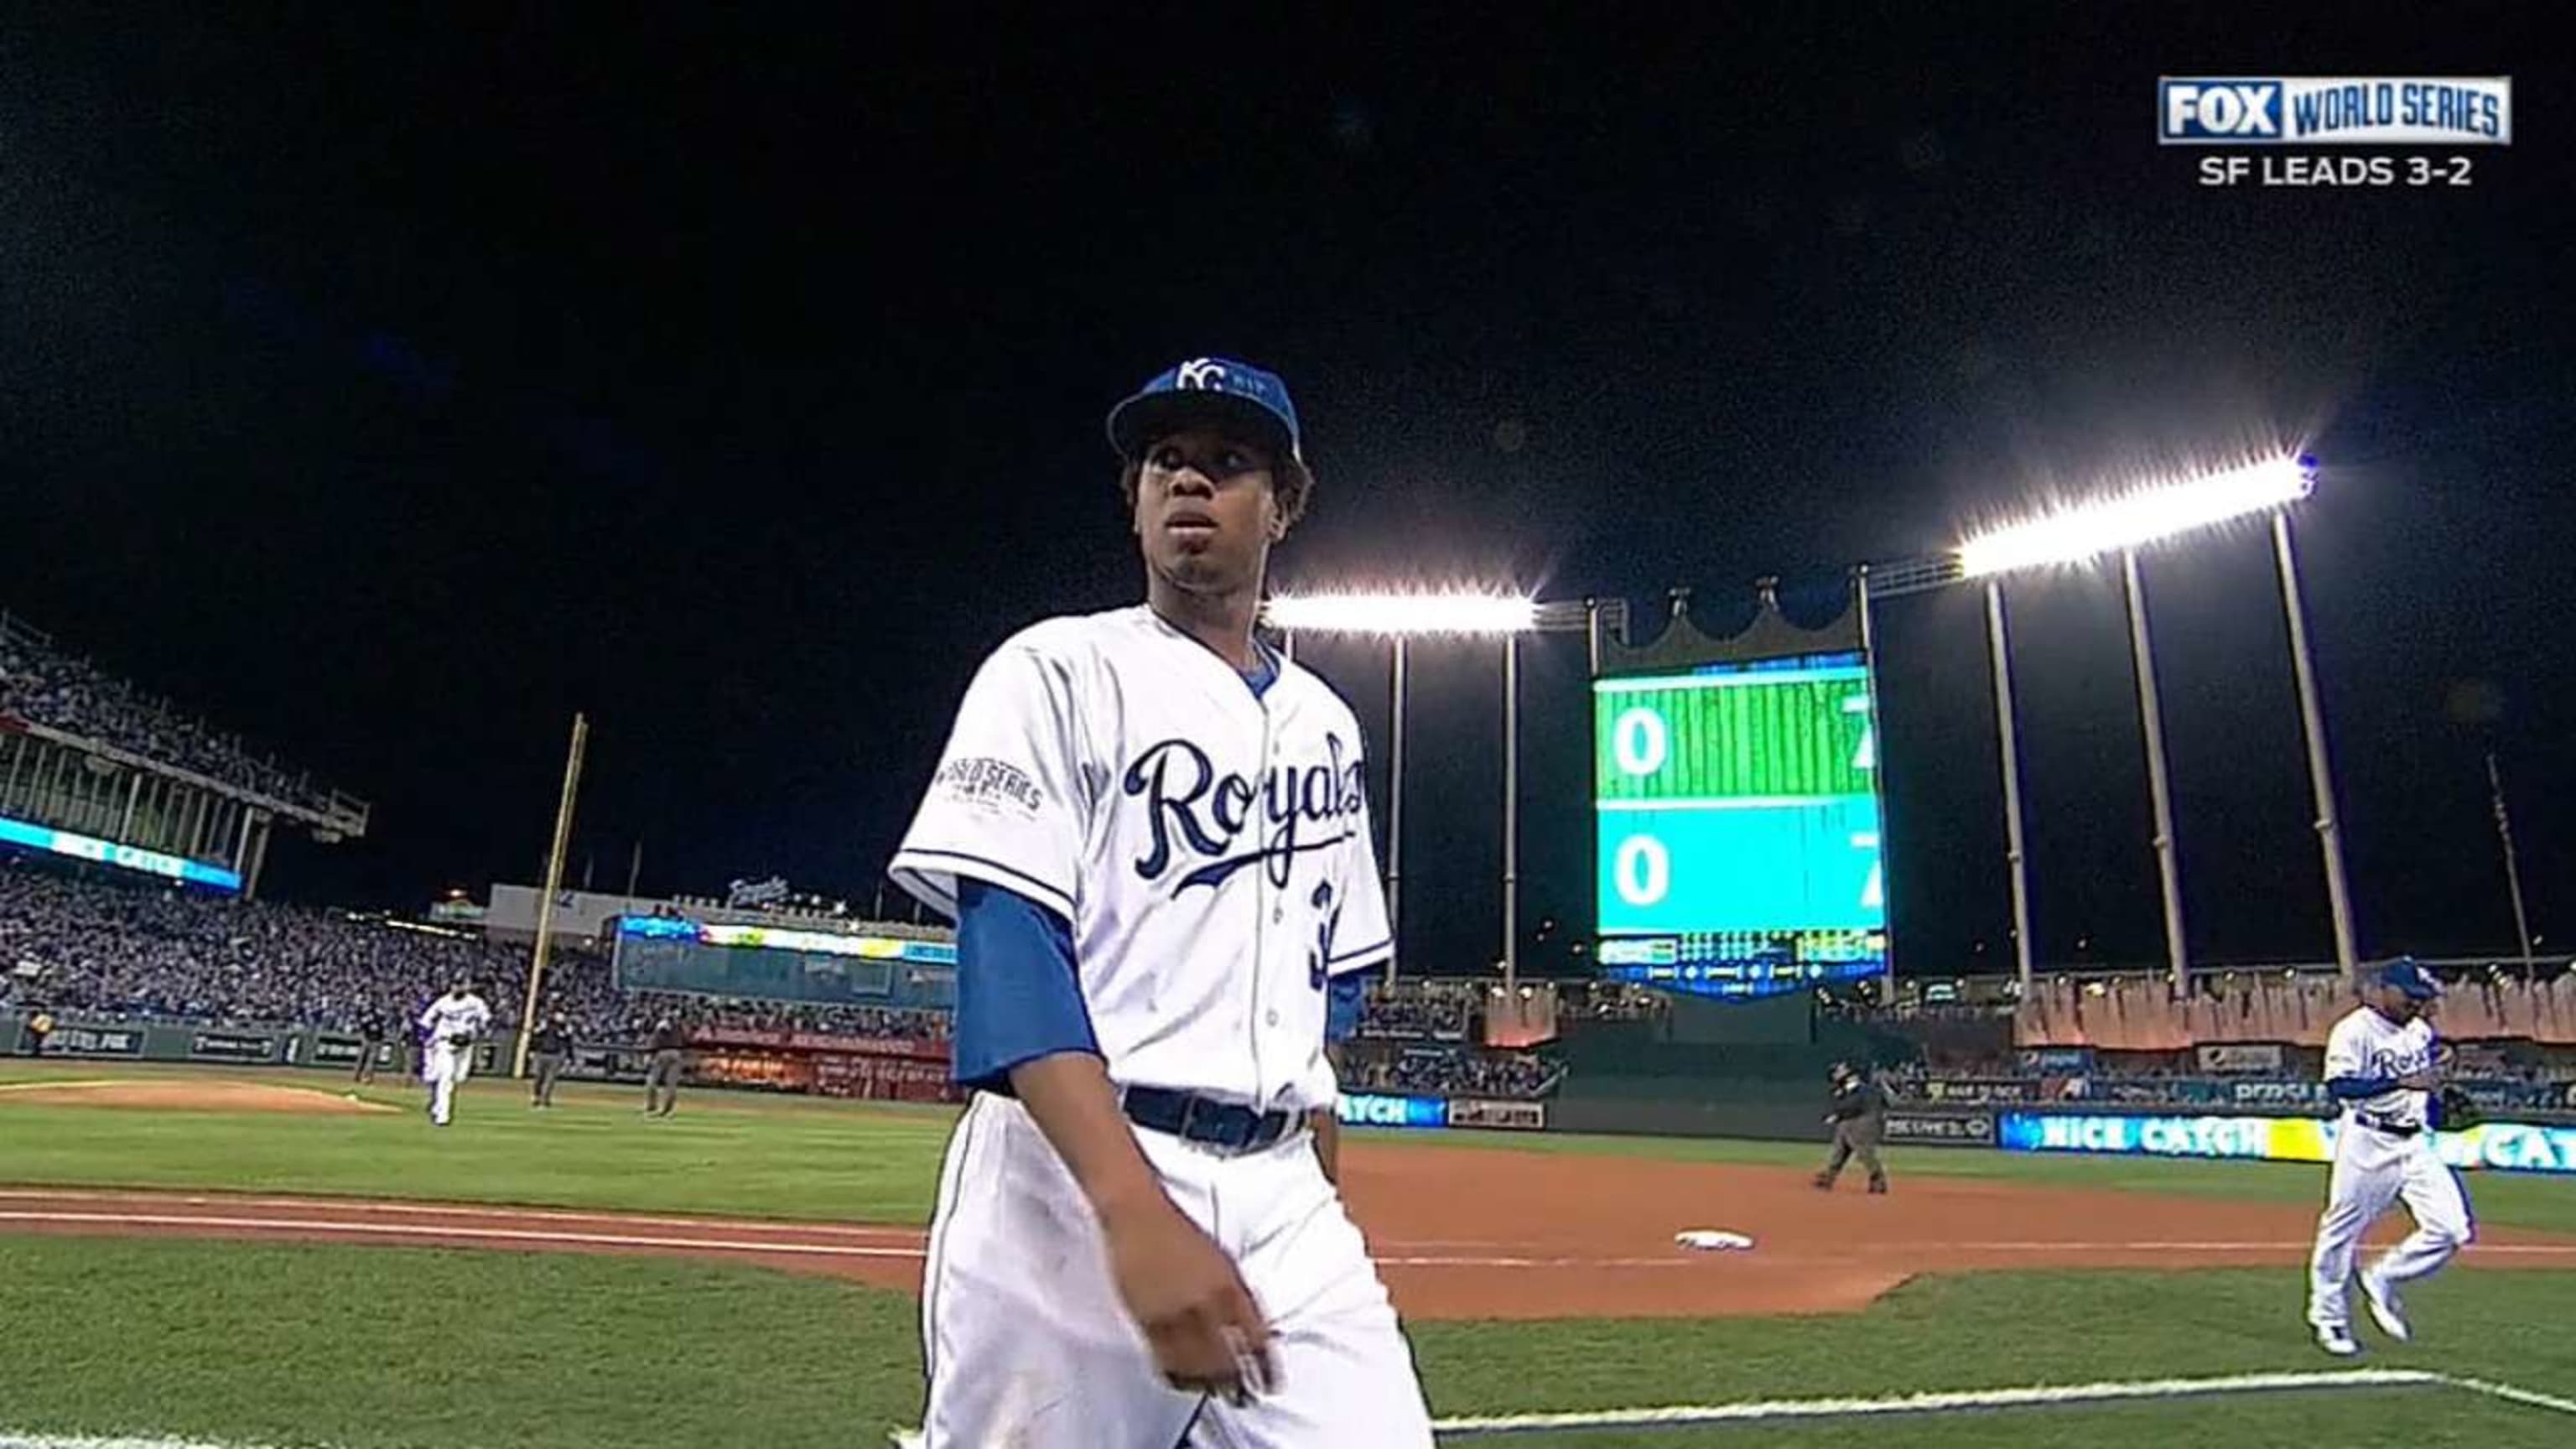 Royals pitcher Yordano Ventura may have been robbed as he lay